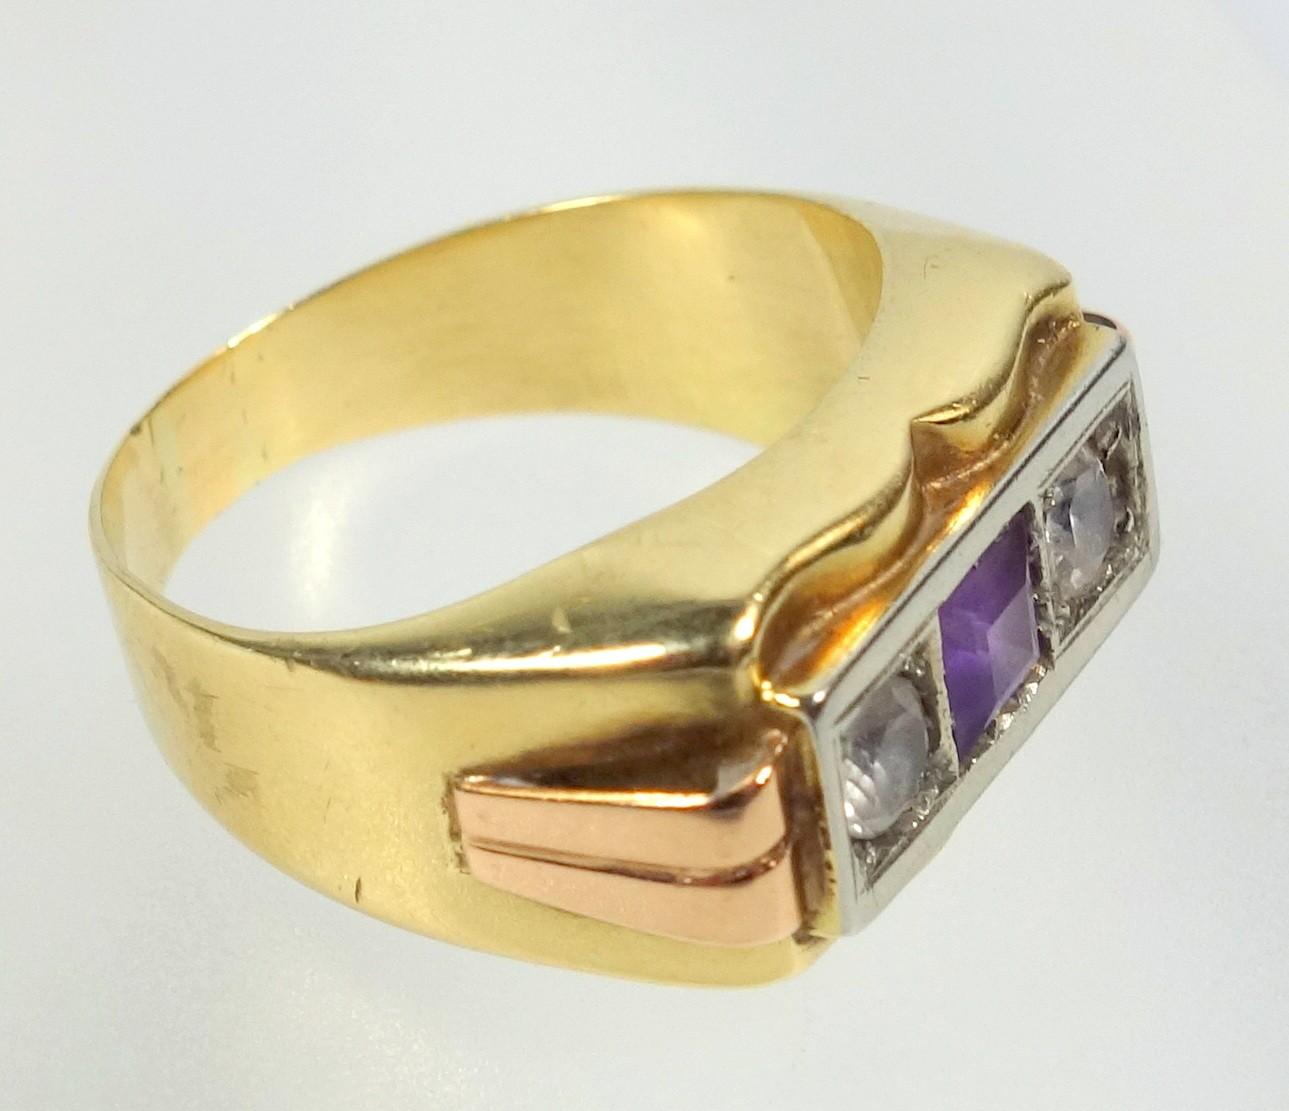 YELLOW METAL RING SET AMETHYST AND TWO WHITE STONES, STAMPED 750, GROSS 6.2 GRAMS. - Image 3 of 5